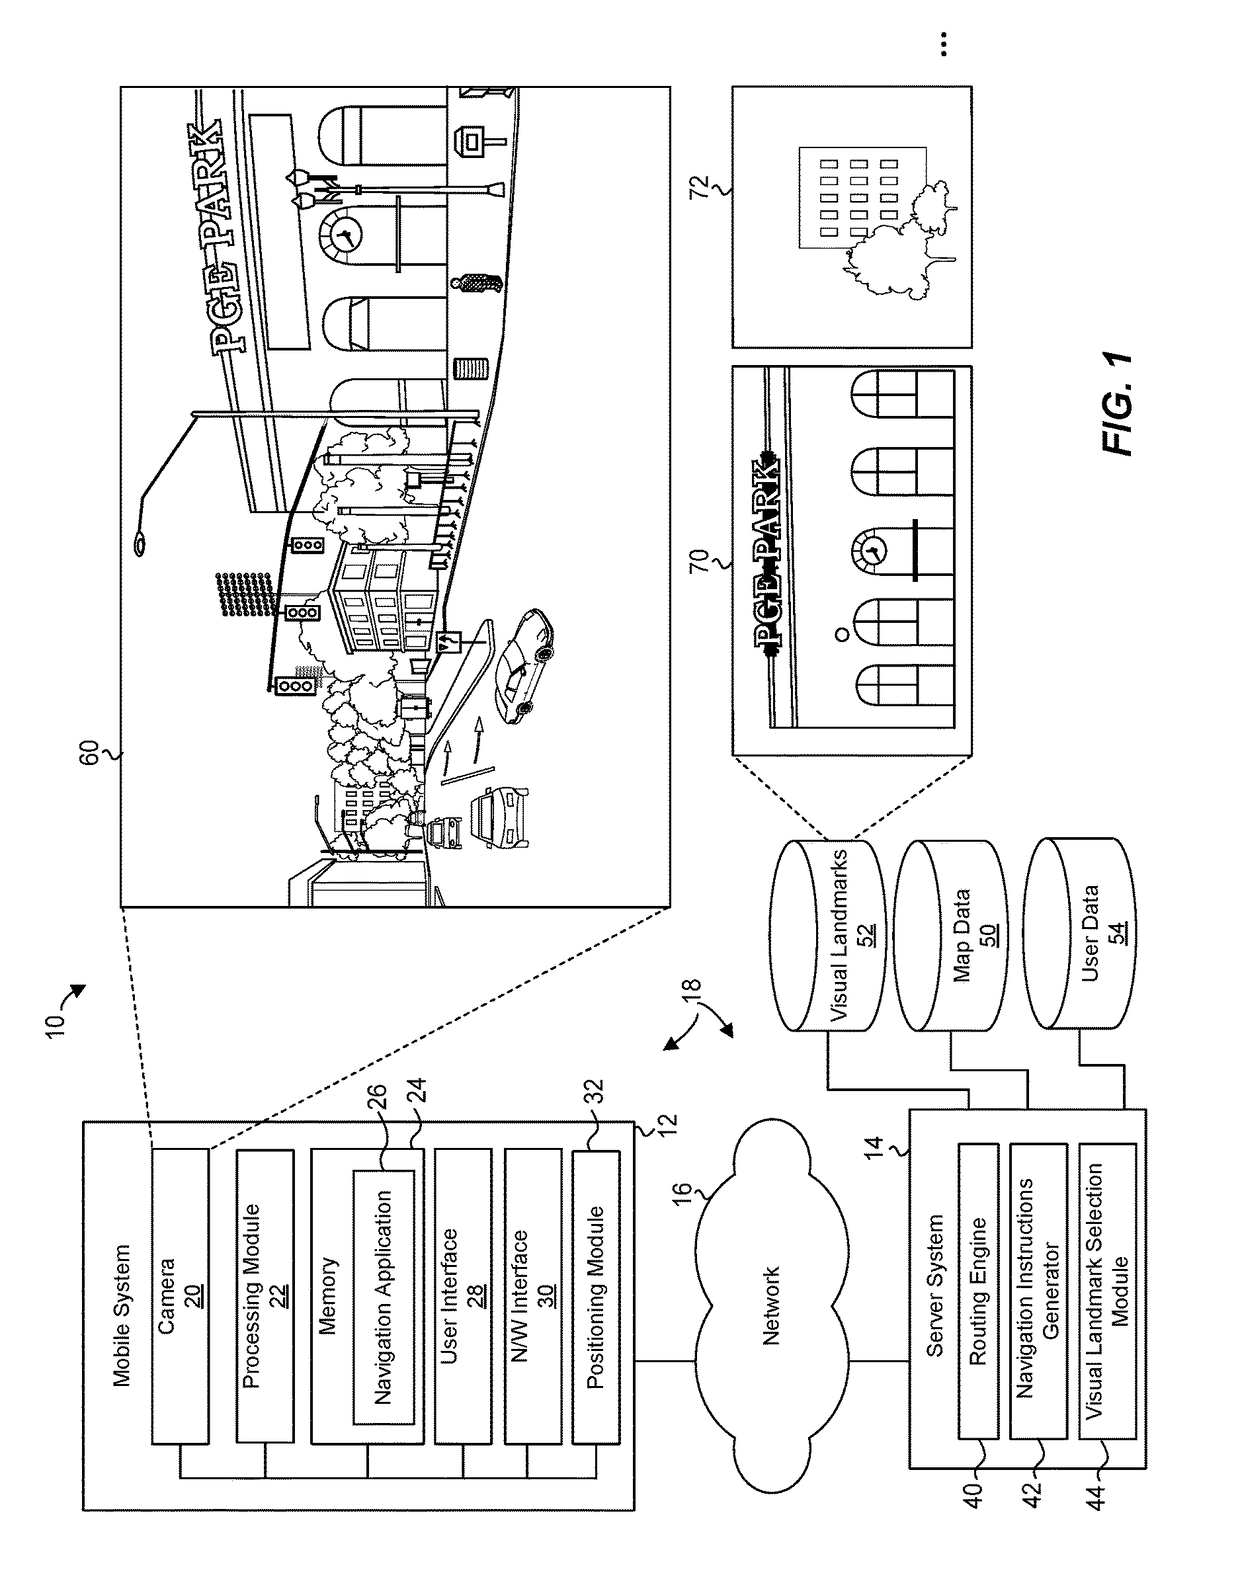 Systems and Methods for Using Real-Time Imagery in Navigation